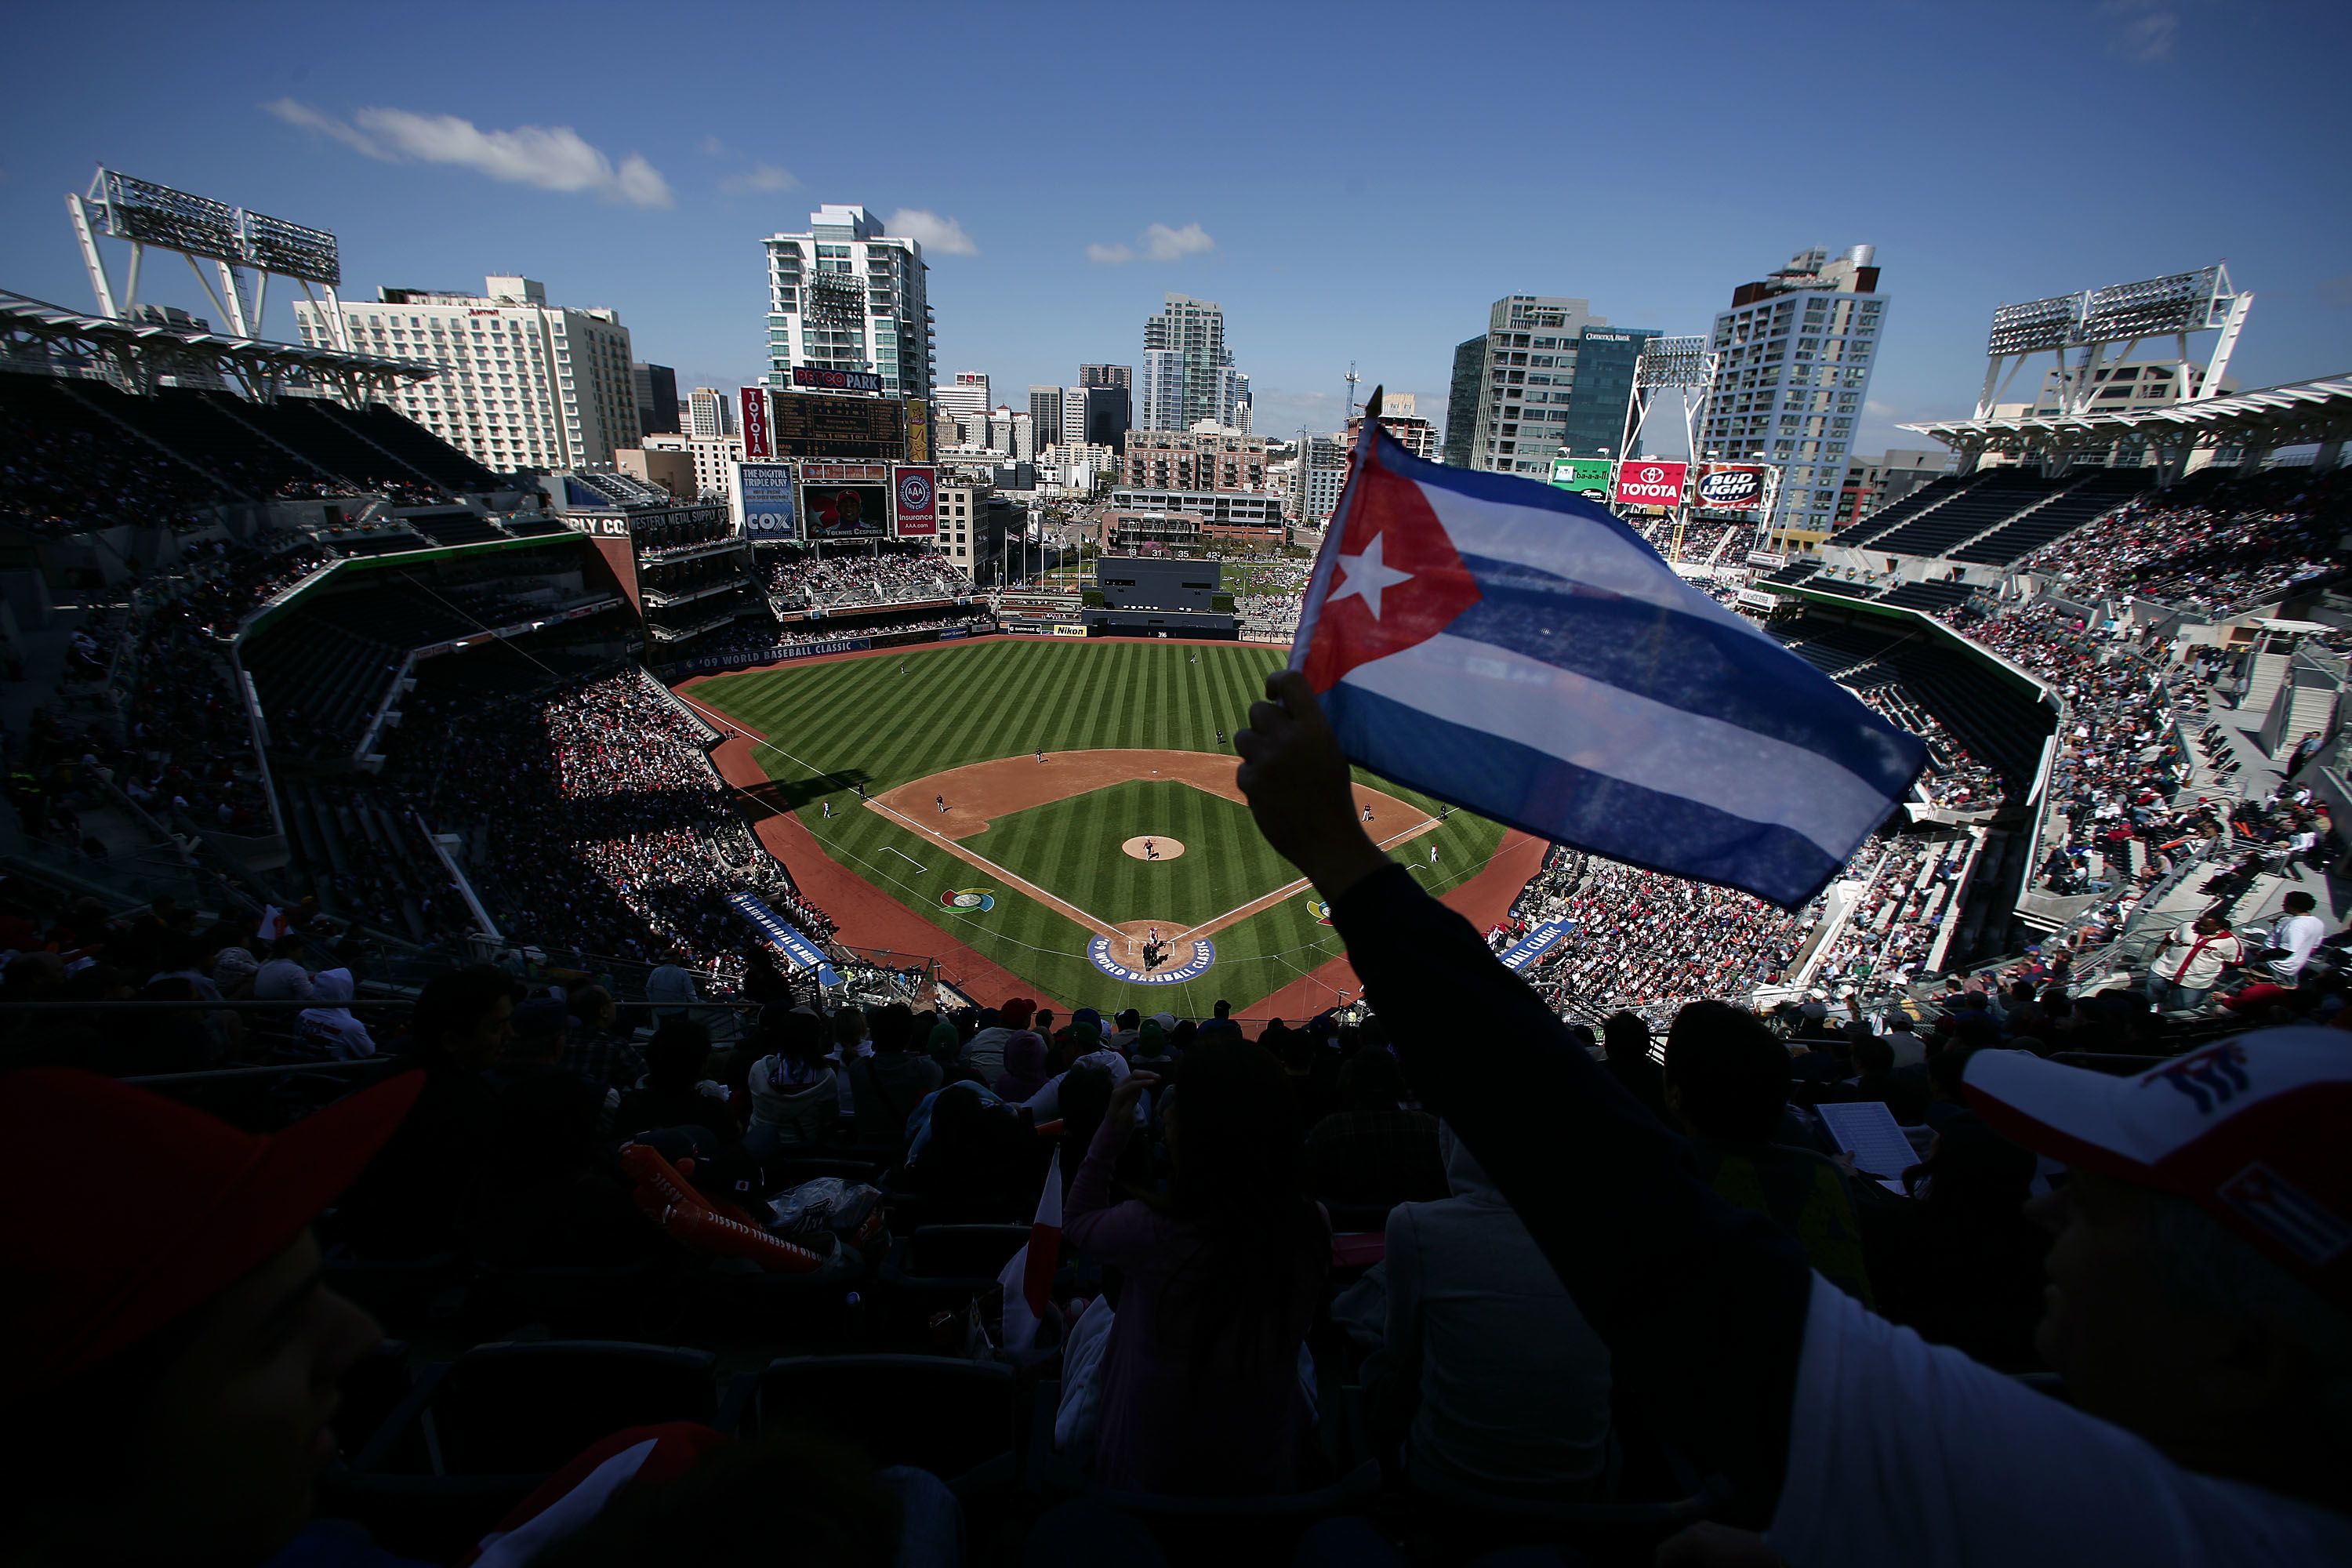 After years of sneaking out, Cuban baseball players no longer have to  defect to play in MLB